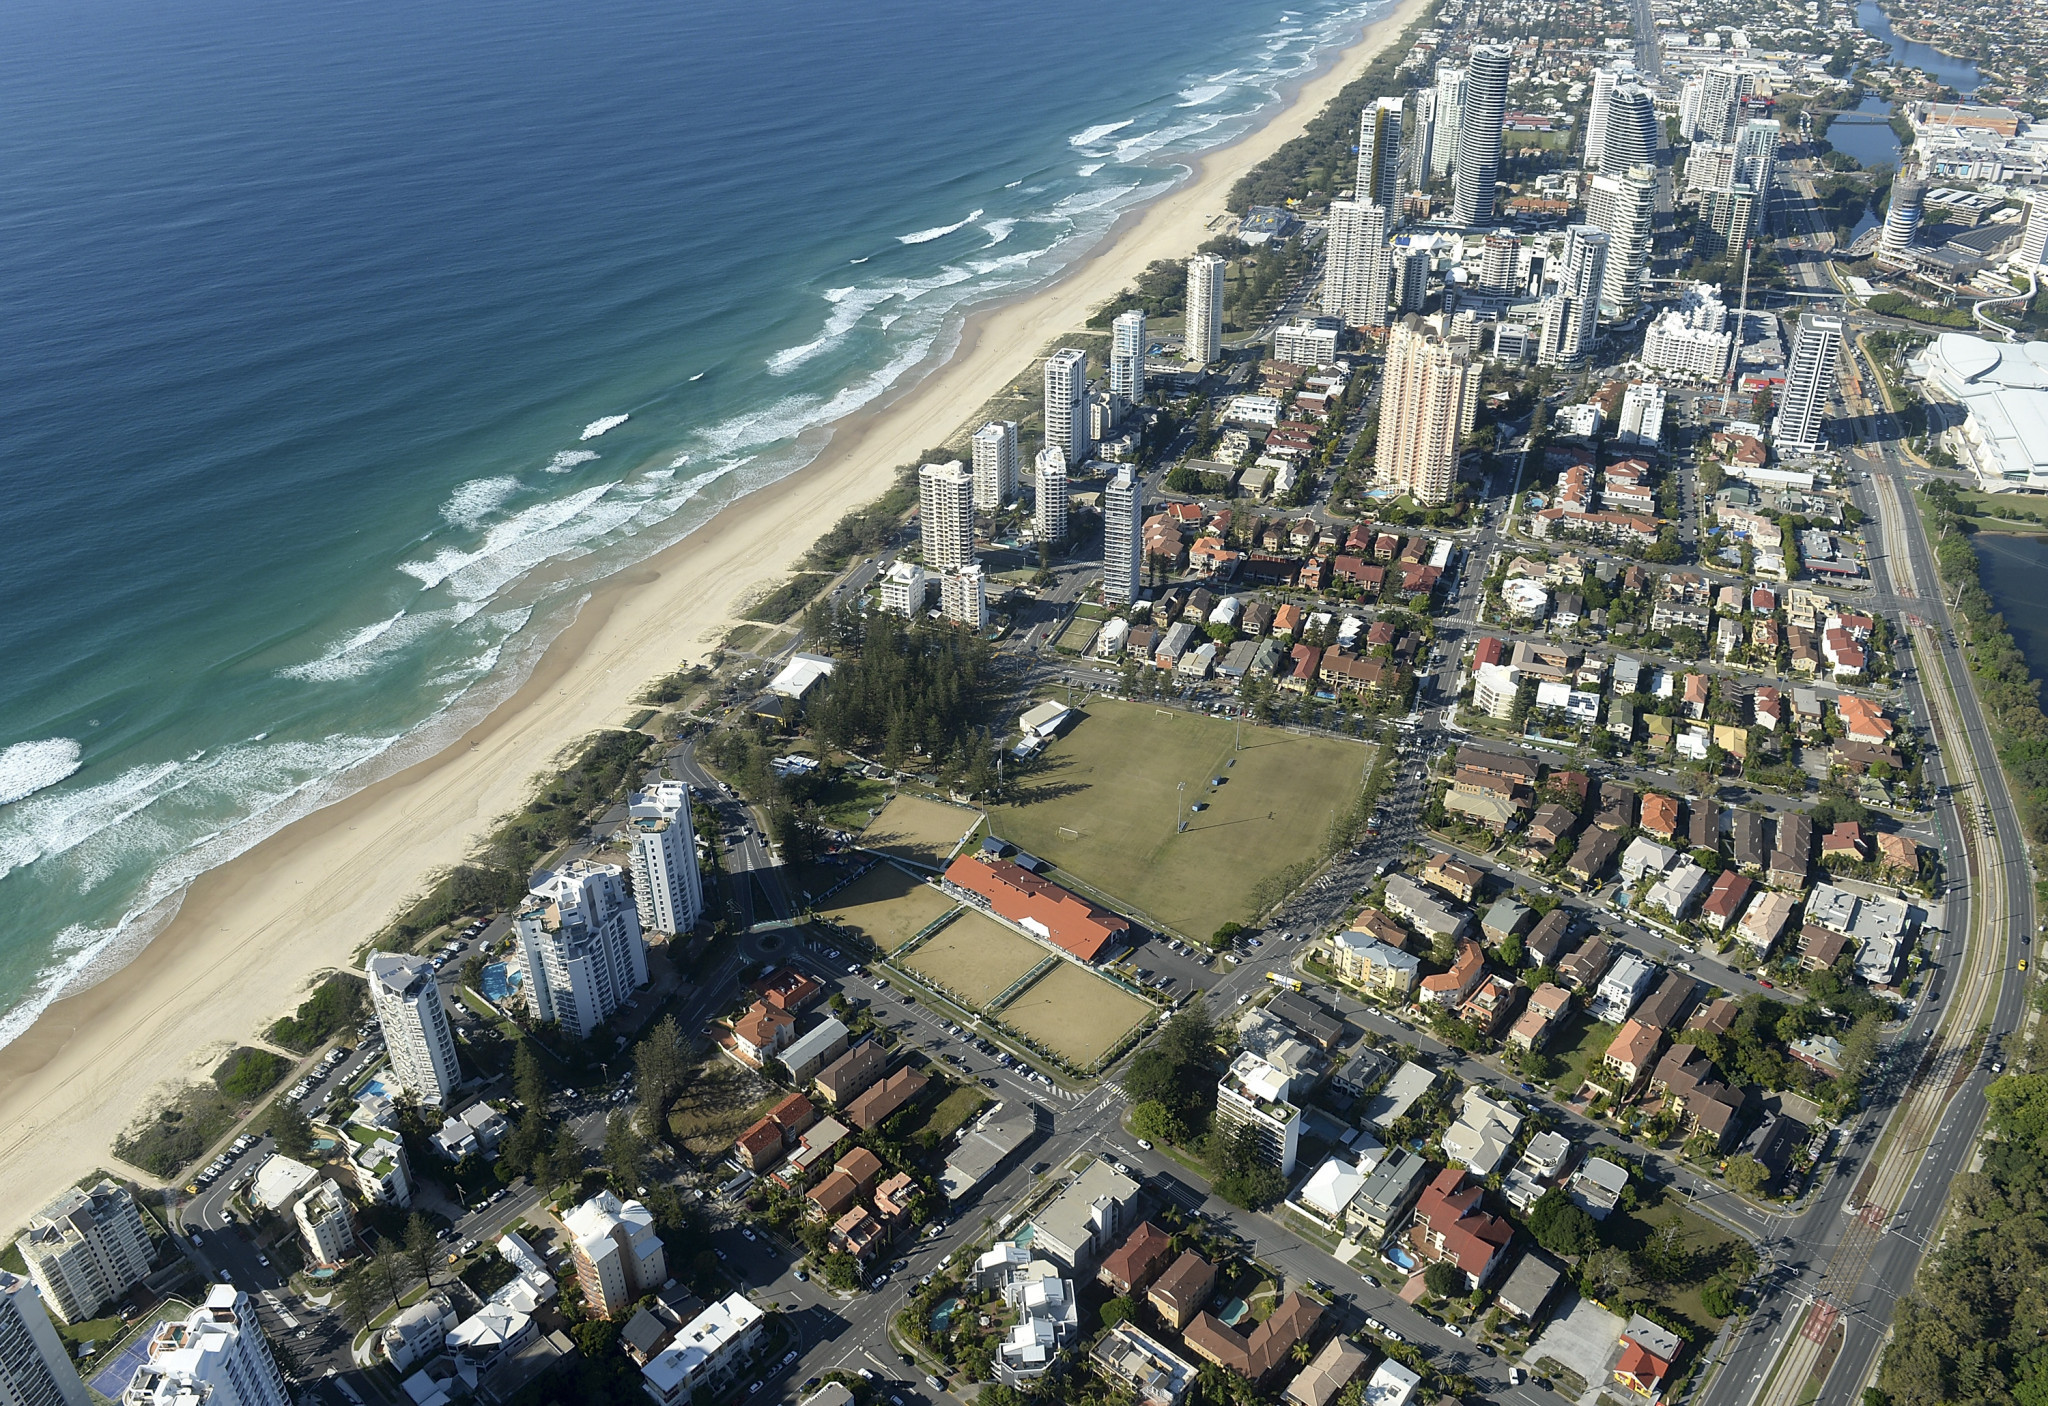 An aerial view of the Broadbeach Bowls Club which will host the Lawn Bowls event at the 2018 Commonwealth Games in Gold Coast ©Getty Images